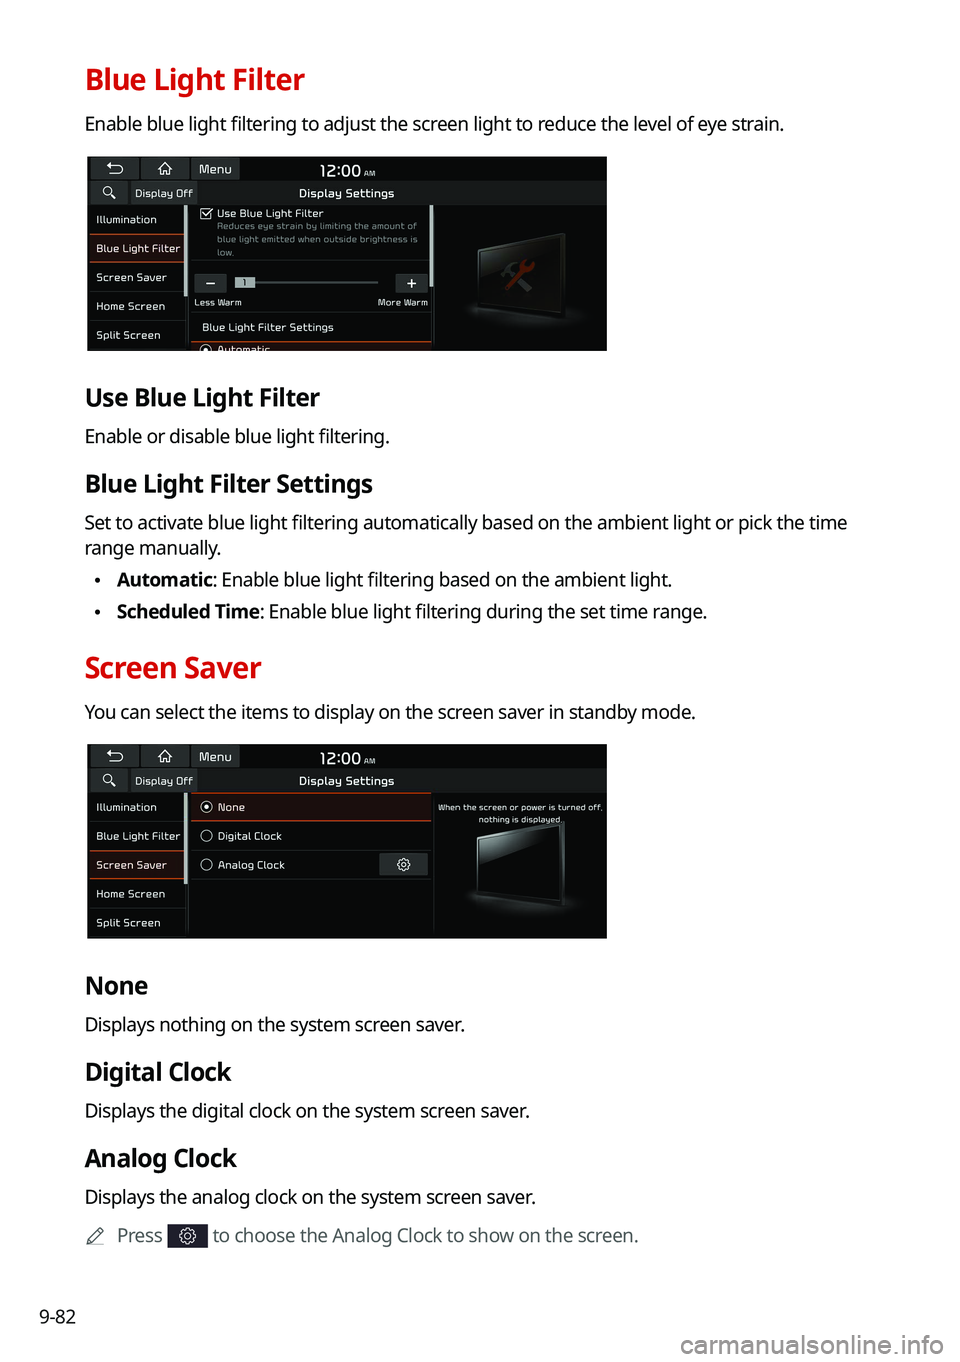 KIA FORTE 2021  Navigation System Quick Reference Guide 9-82
Blue Light Filter
Enable blue light filtering to adjust the screen light to reduce the level of eye strain.
Use Blue Light Filter
Enable or disable blue light filtering.
Blue Light Filter Setting